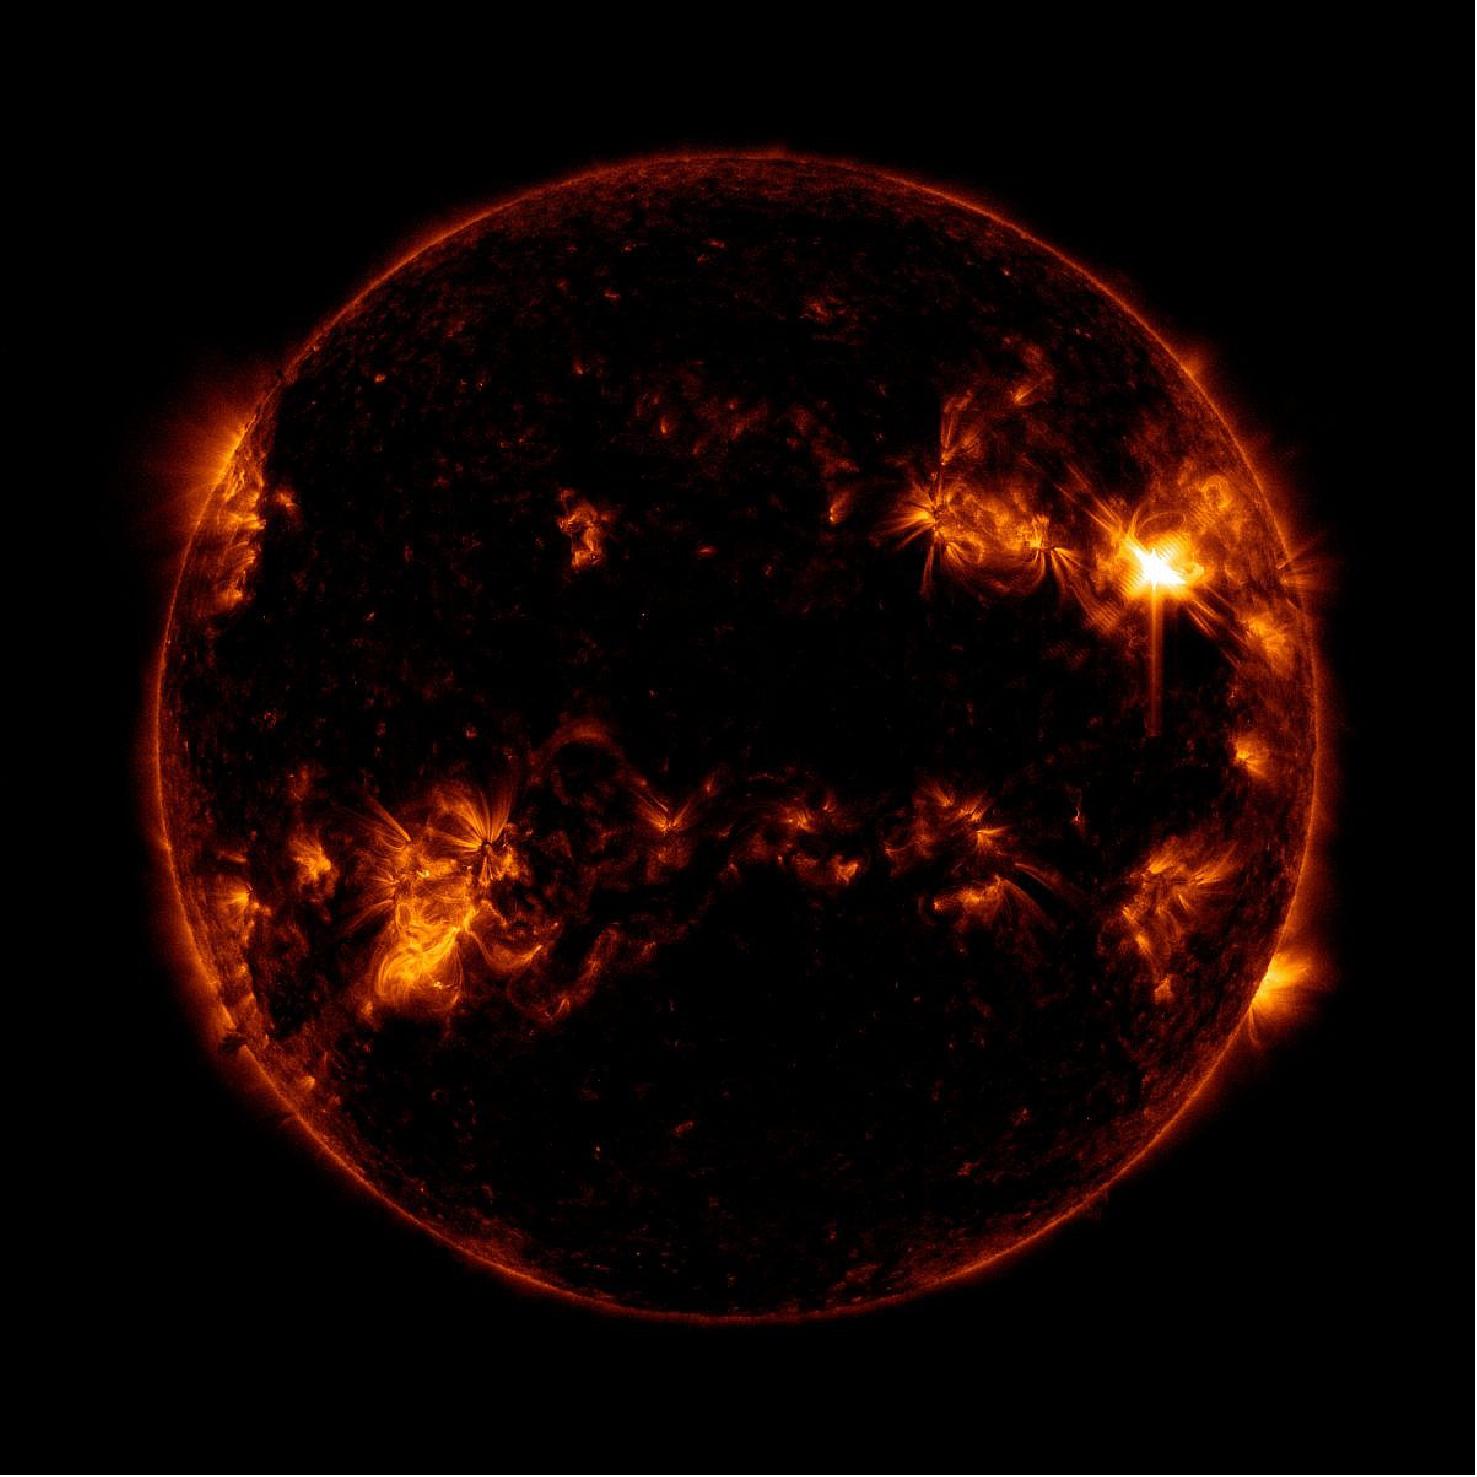 Figure 15: NASA's Solar Dynamics Observatory captured this image of a solar flare – as seen in the bright flash in the upper right portion of the image– on March 31, 2022. The image shows a subset of extreme ultraviolet light that highlights the extremely hot material in flares and which is colorized in SDO channel color 131 (image credit: NASA/SDO)